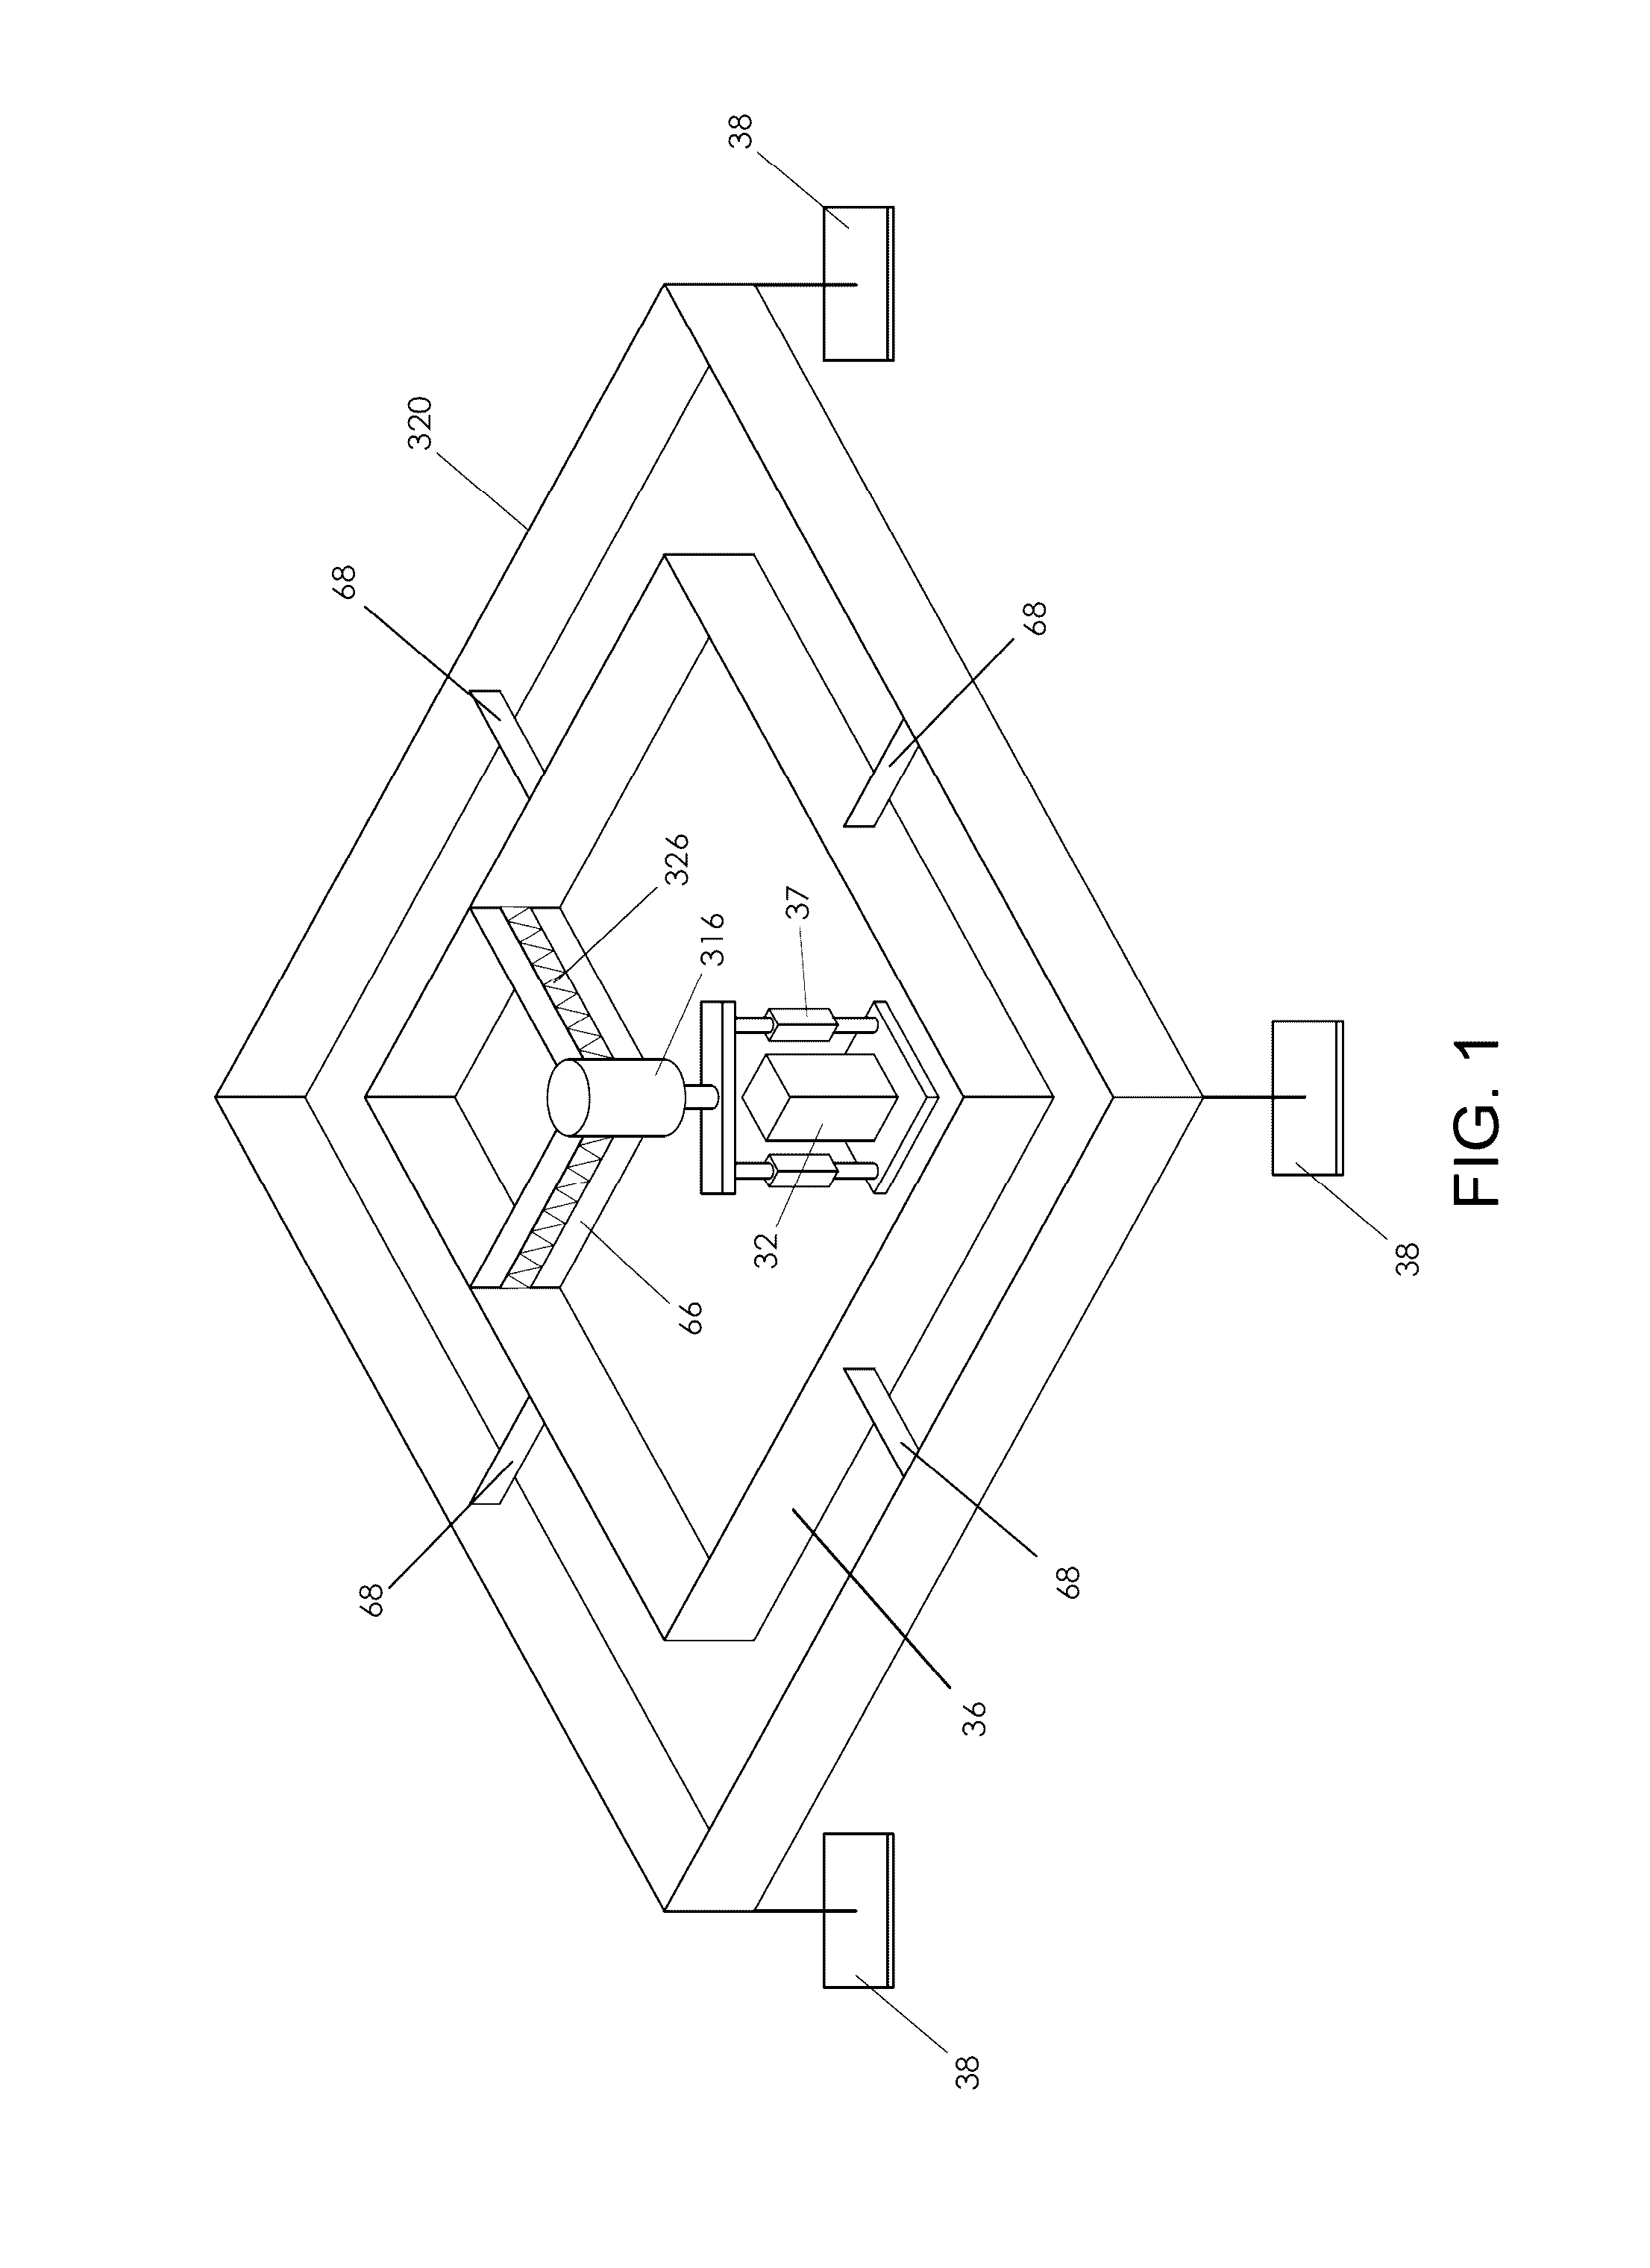 Contact Mechanic Tests using Stylus Alignment to Probe Material Properties